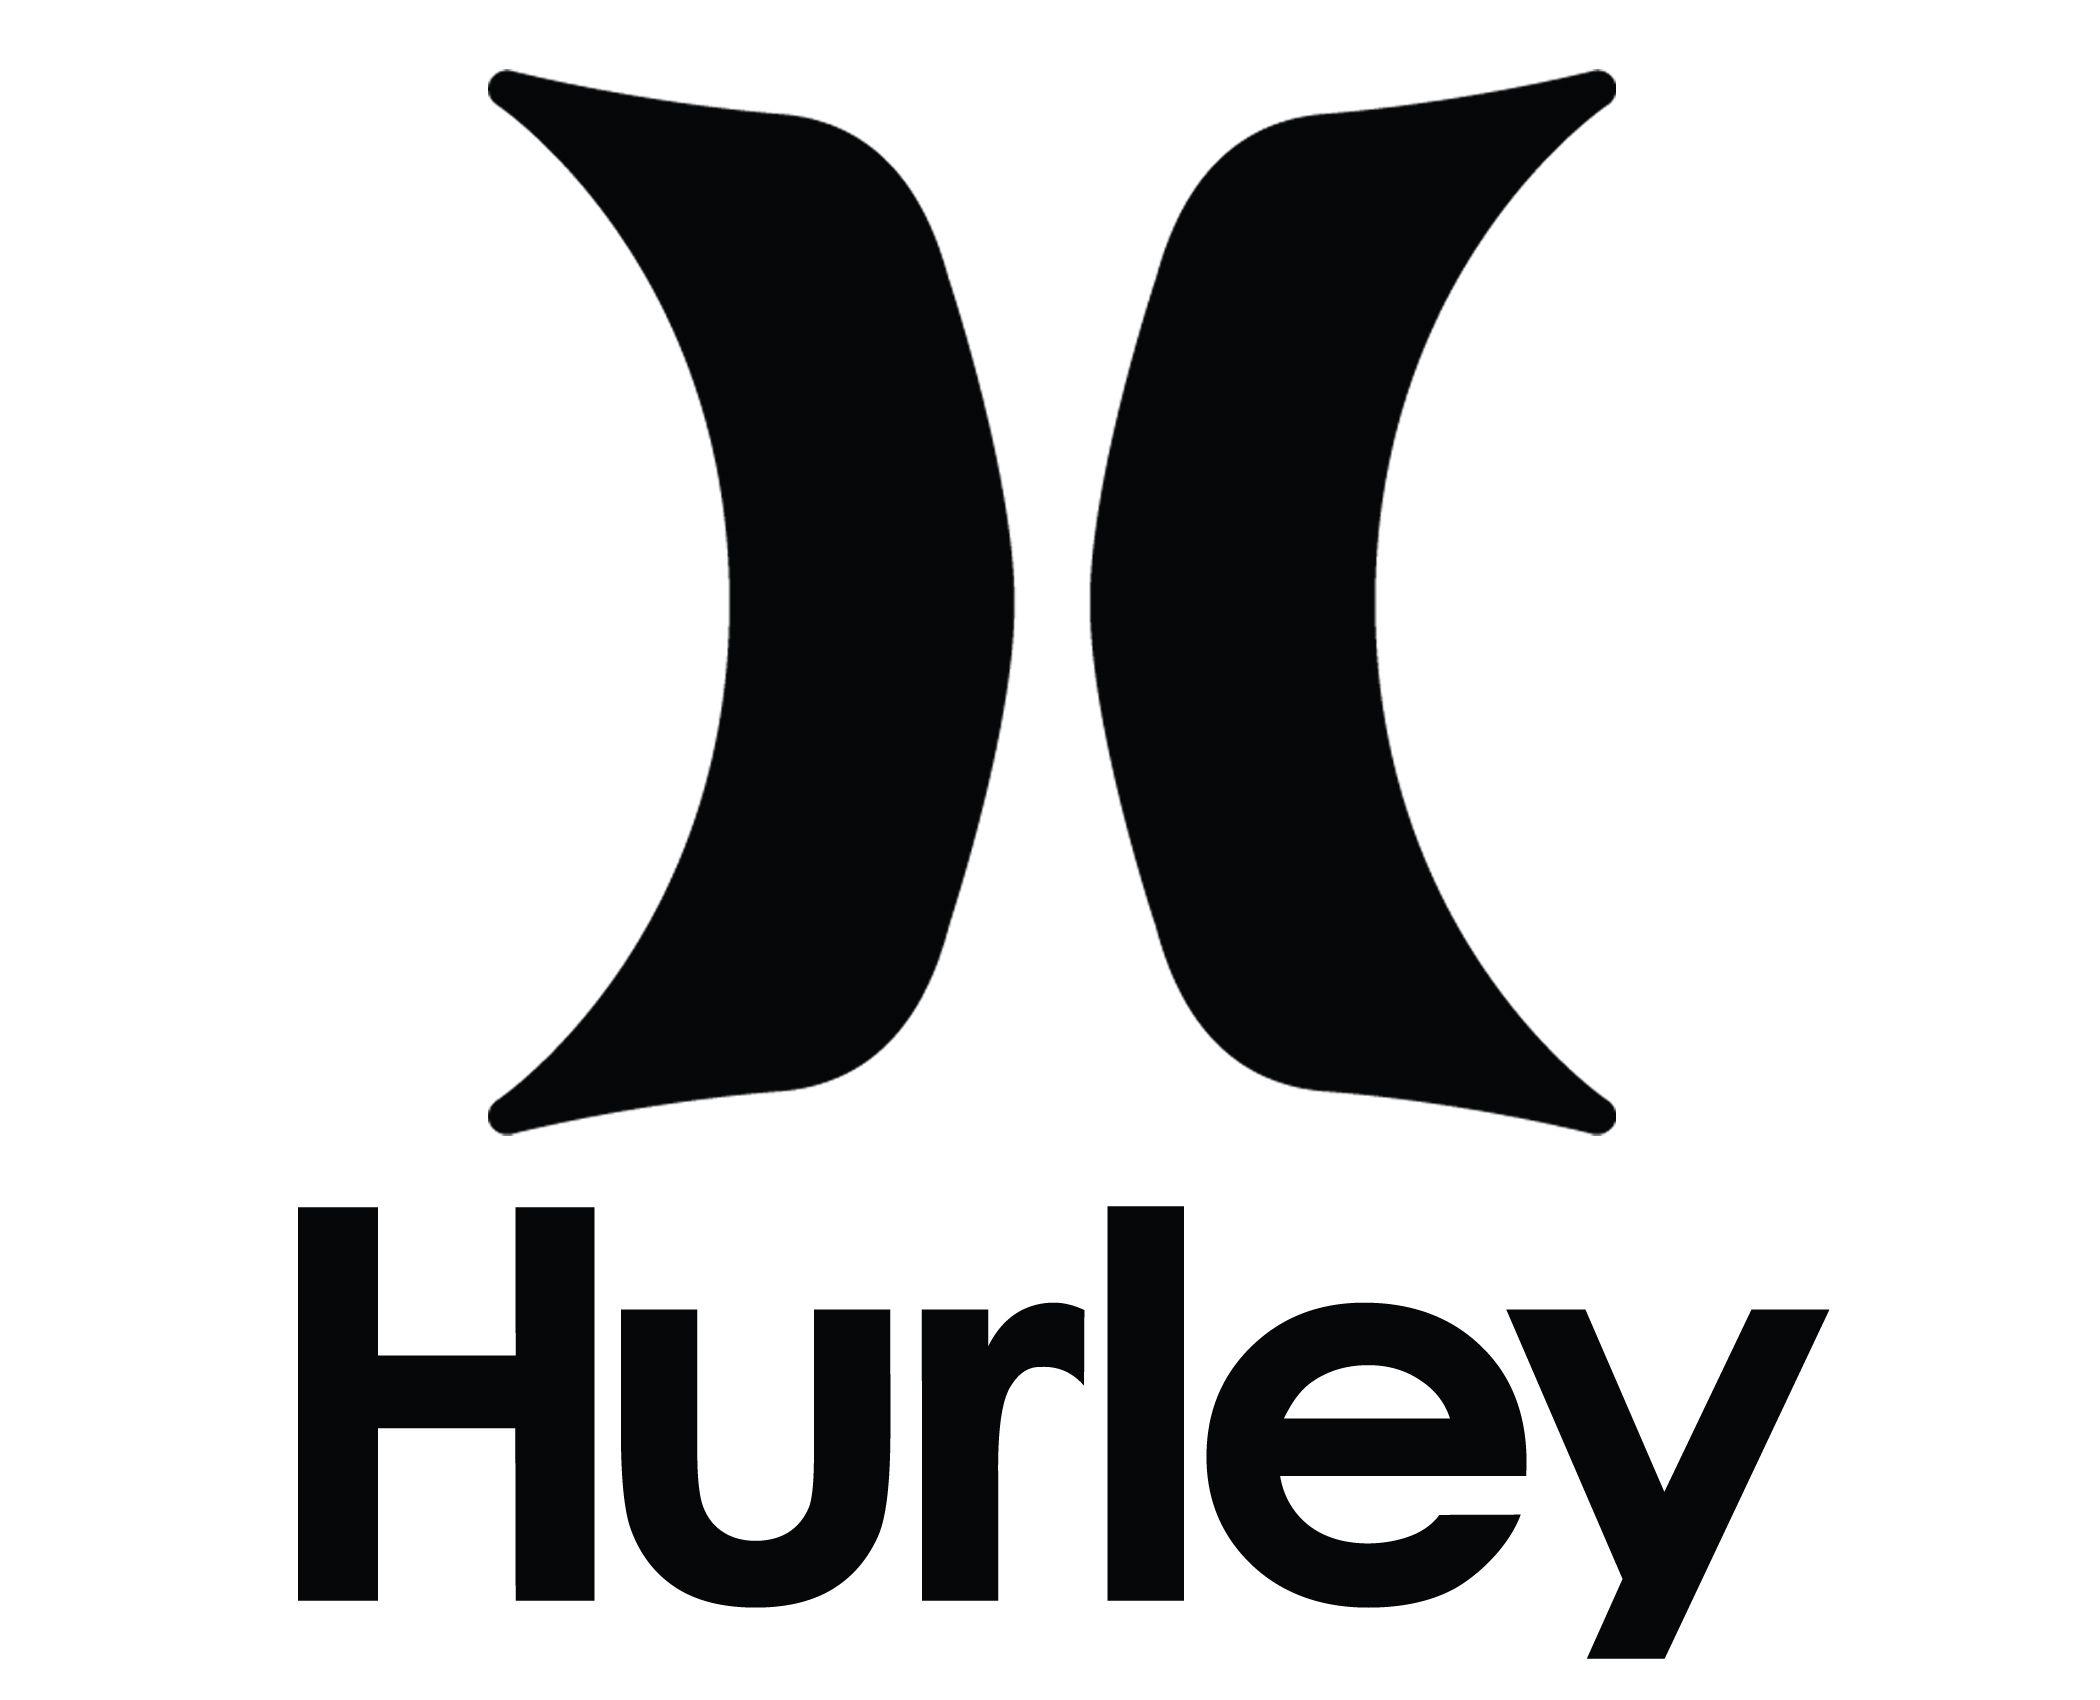 Old Hurley Logo - Hurley Logo, Hurley Symbol, Meaning, History and Evolution